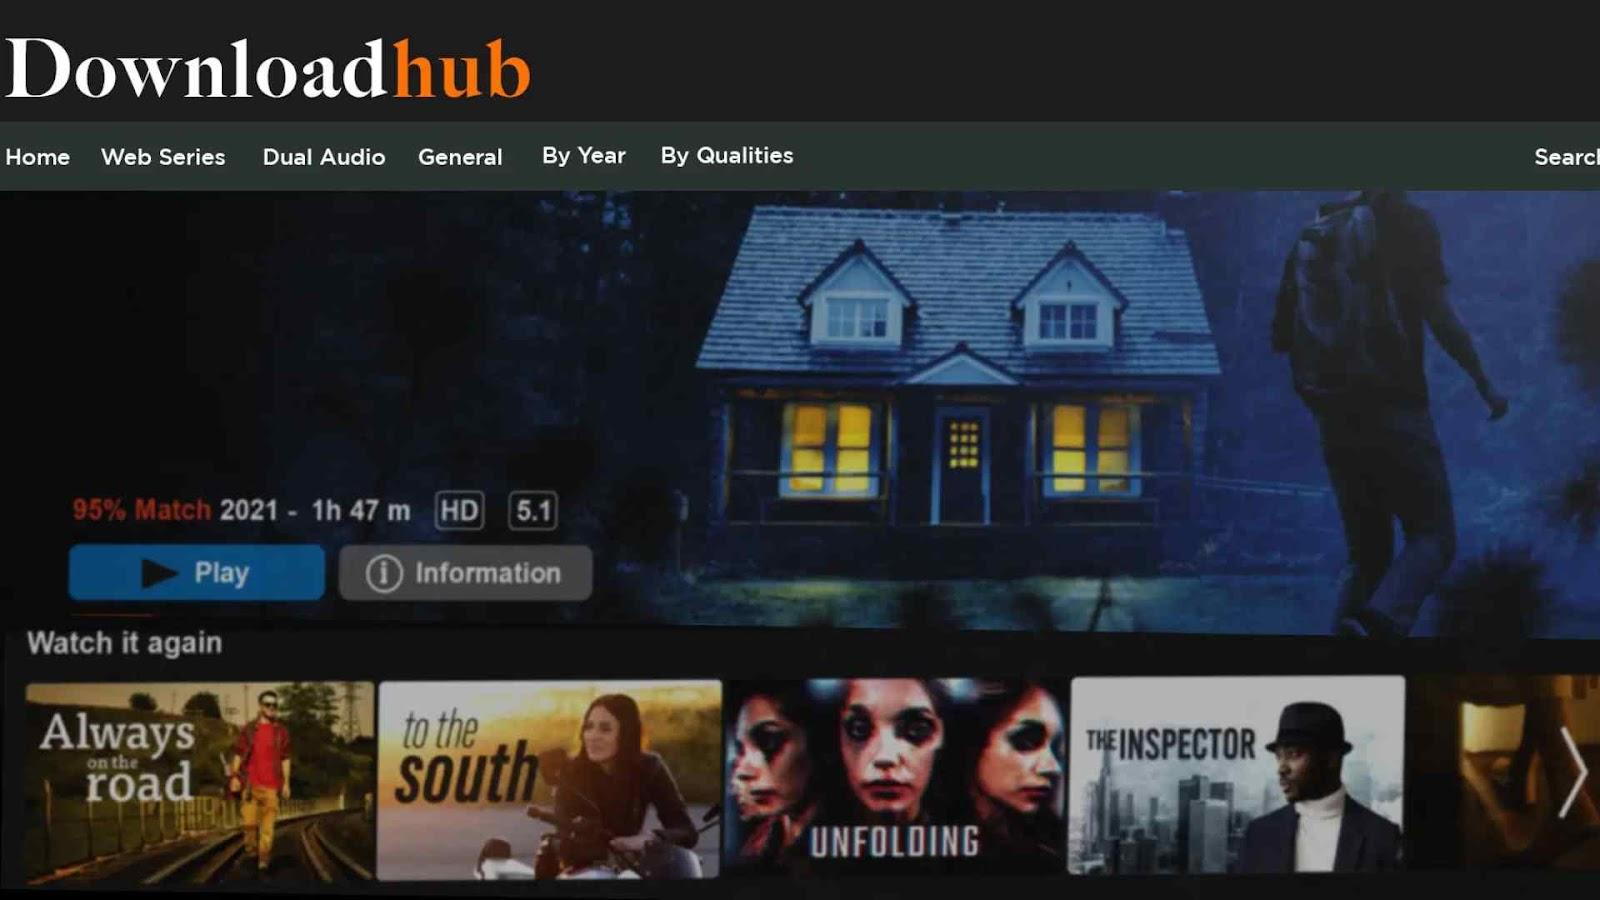 What is DownloadHub